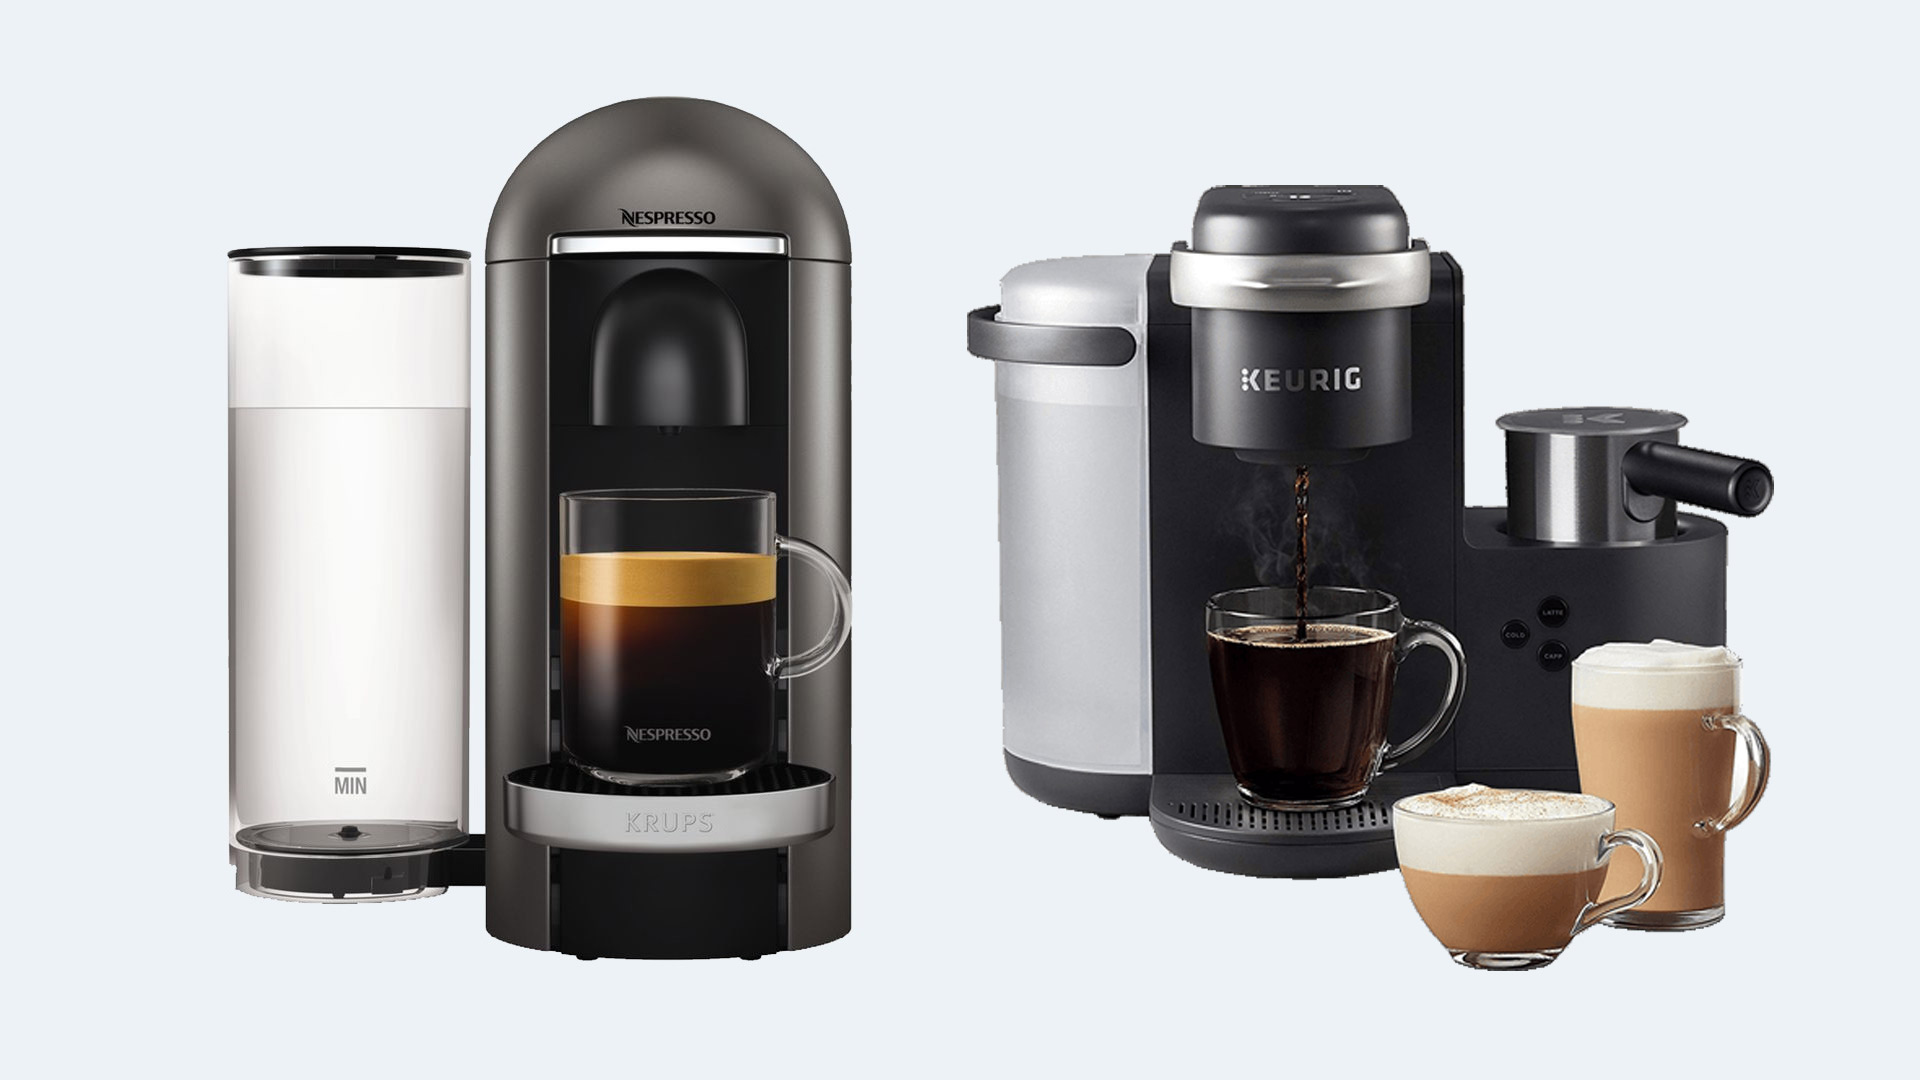 Which is Better: Nespresso or Keurig? Comparing Taste, Cost, and Convenience.